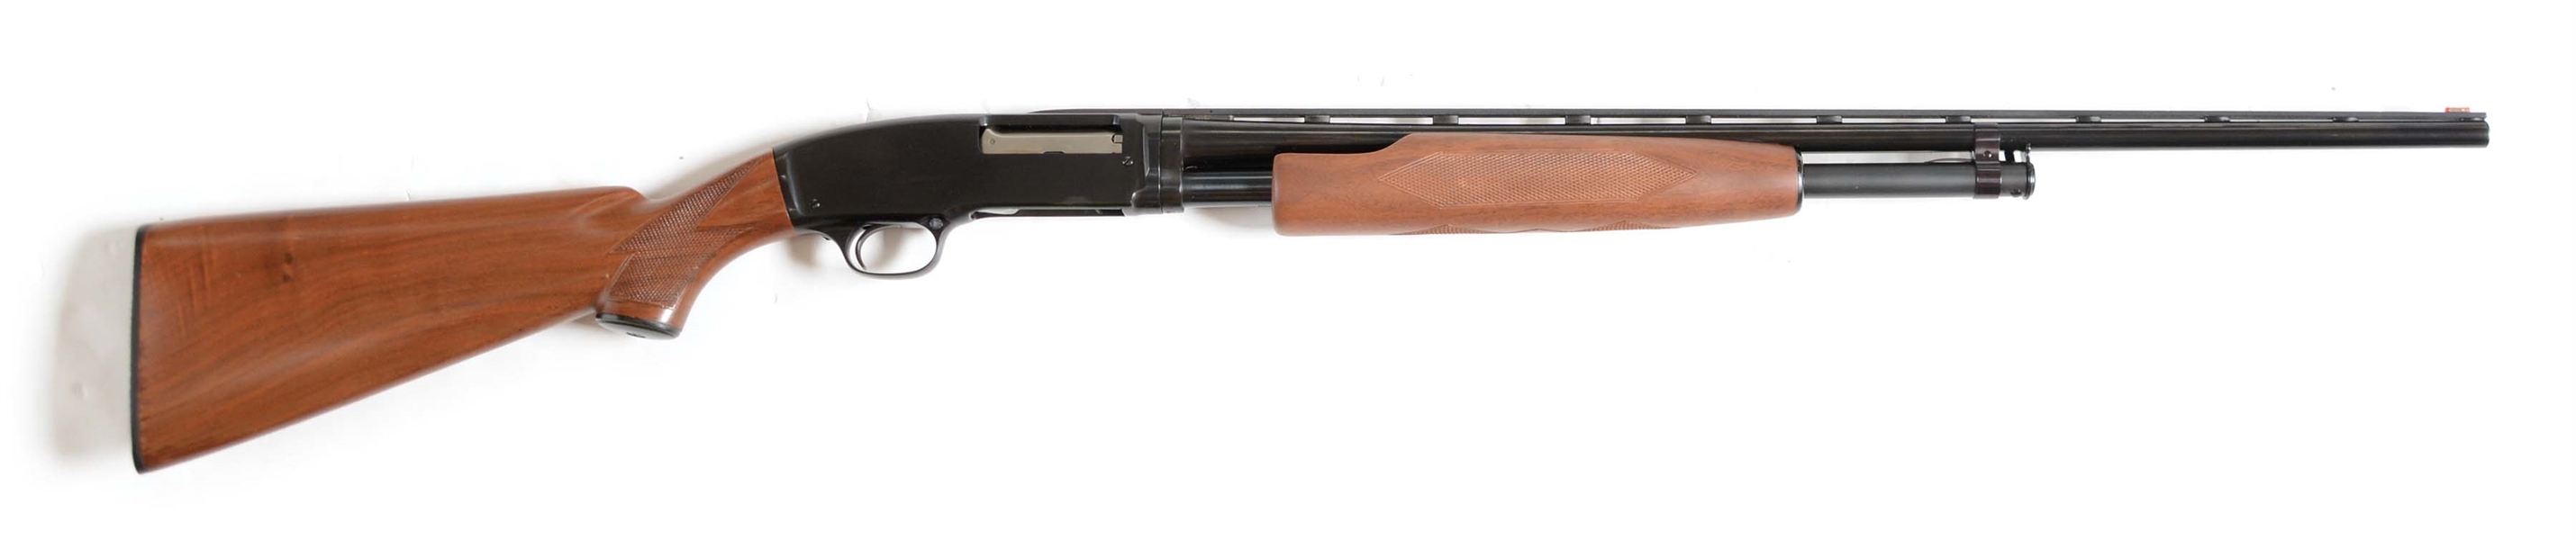 (C) WINCHESTER MODEL 42 SLIDE ACTION SHOTGUN IN .410 BORE WITH SIMMONS VENT RIB (1960).